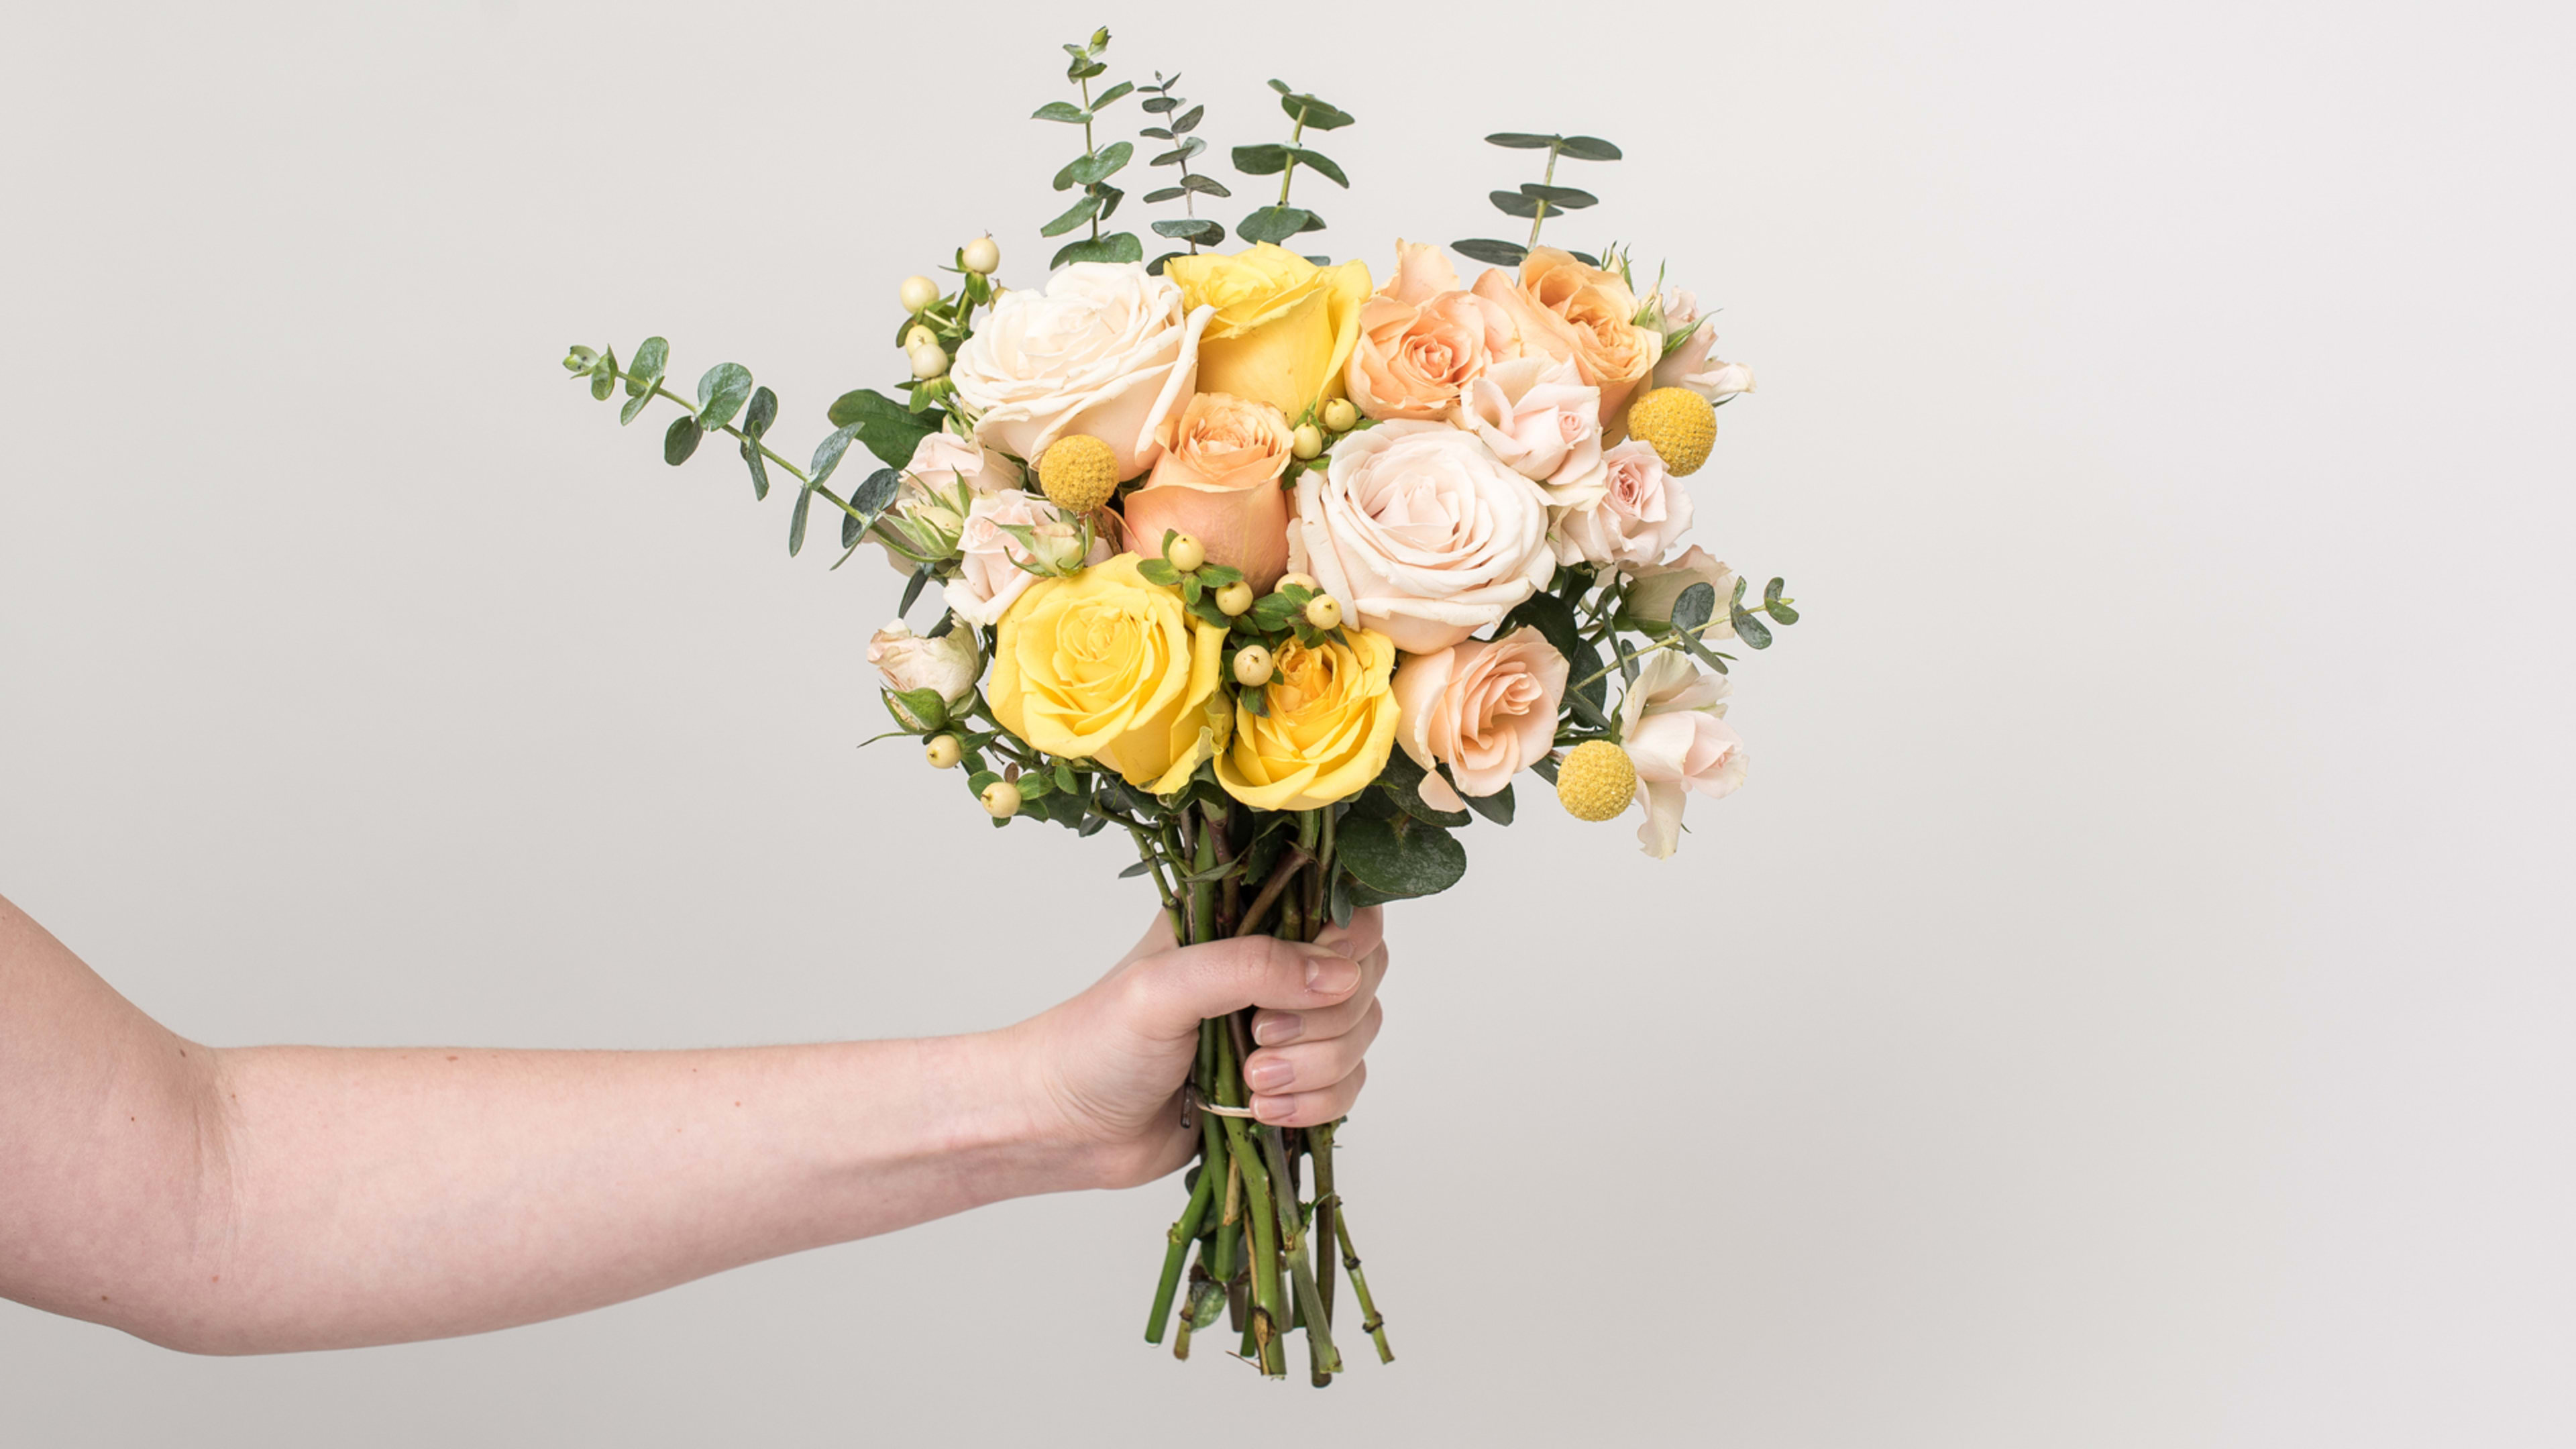 This flower startup wants women to buy bouquets for their friends